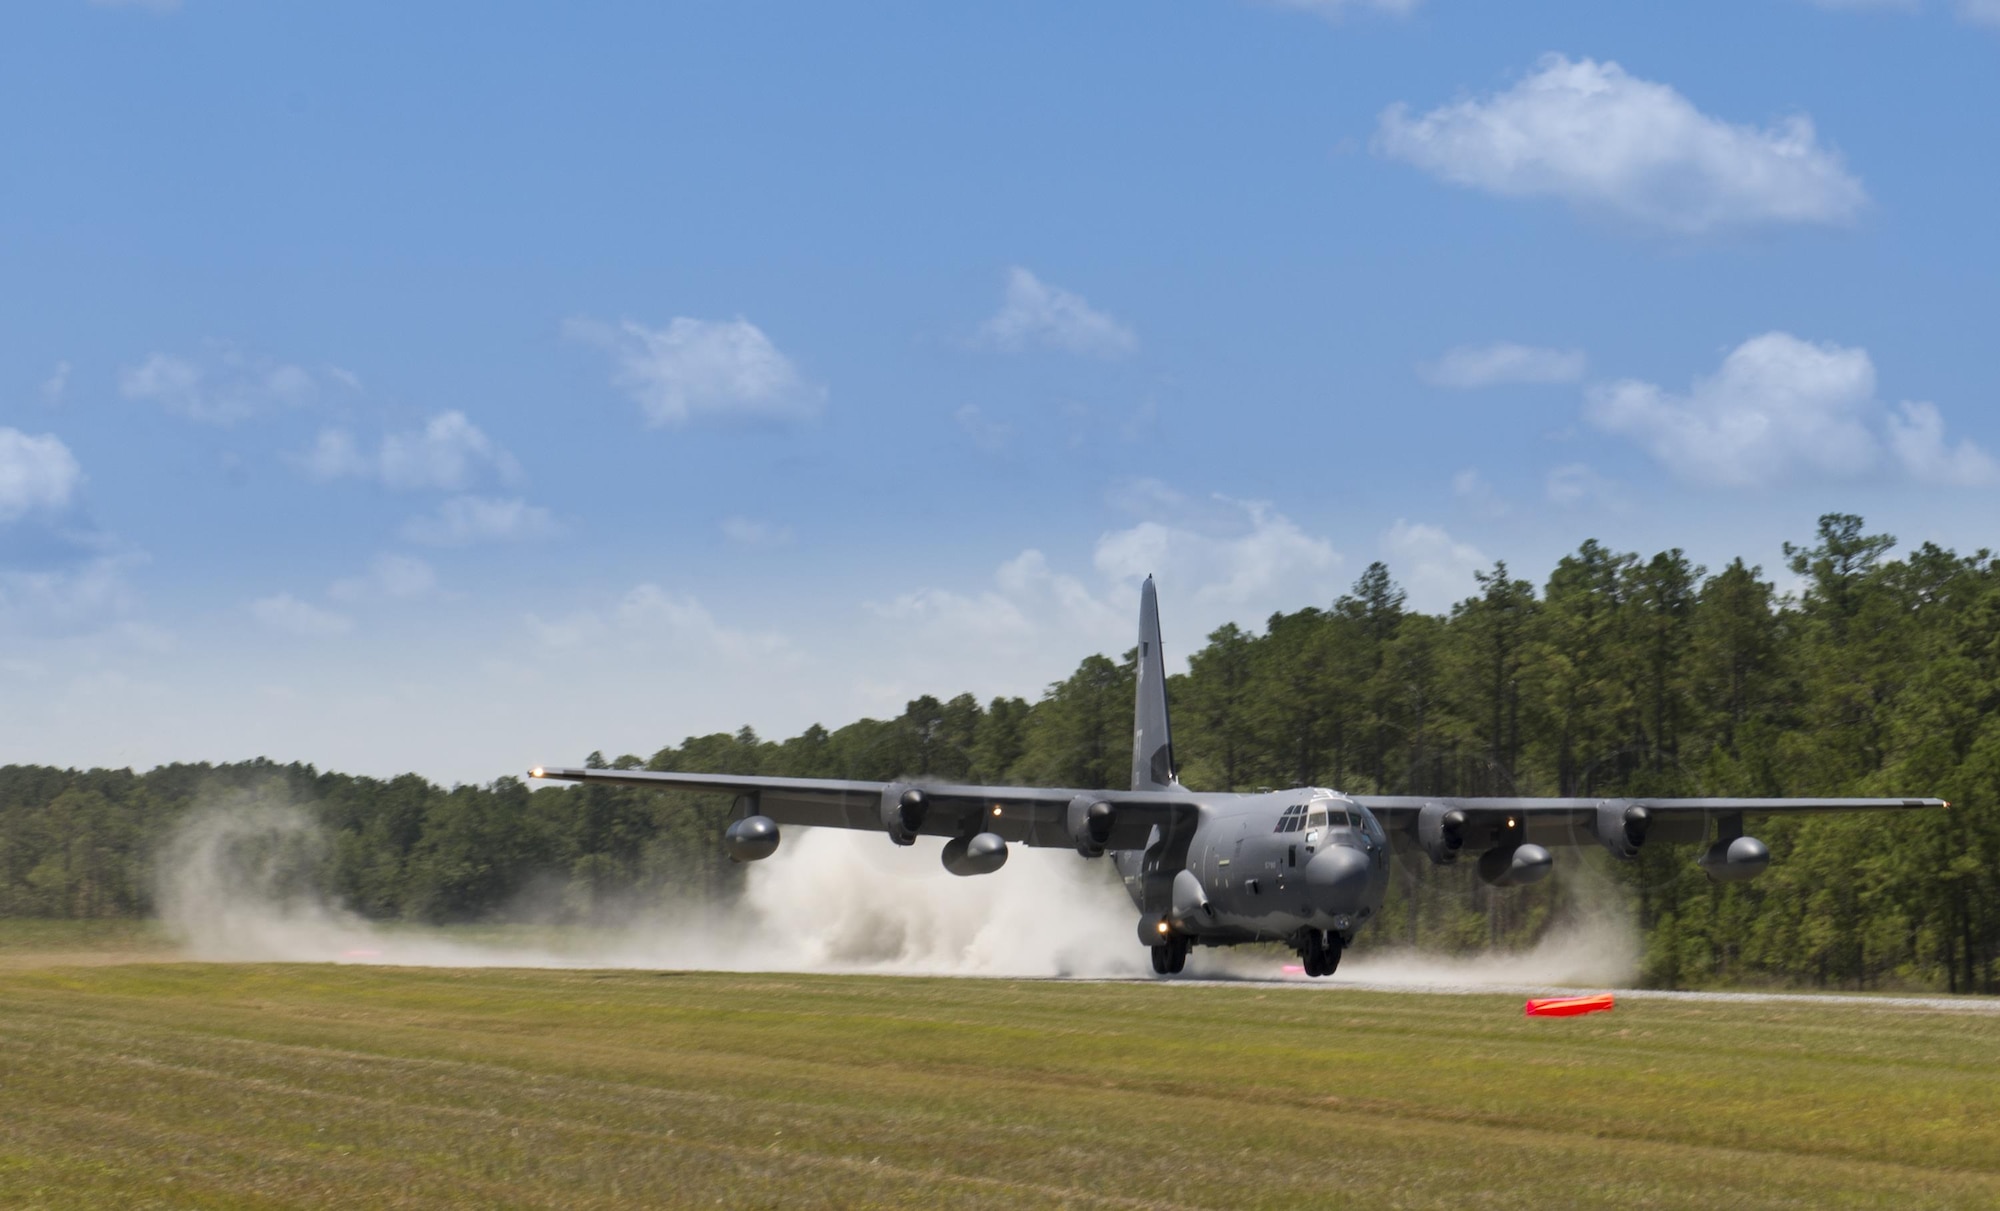 An HC-130J Combat King II from the 71st Rescue Squadron lands on the Bemiss Field unimproved landing zone, July 29, 2016, at Grand Bay Bombing and Gunnery Range, Ga. This flight marked the first time an HC-130J landed at the ULZ on Bemiss Field, which was previously used for airdrops and helicopter landings. The landing validated the pilot’s training for future operations in austere locations and met requirements for training that cannot be accomplished on paved runways or assault strips. (U.S. Air Force photo by Tech. Sgt. Zachary Wolf)
